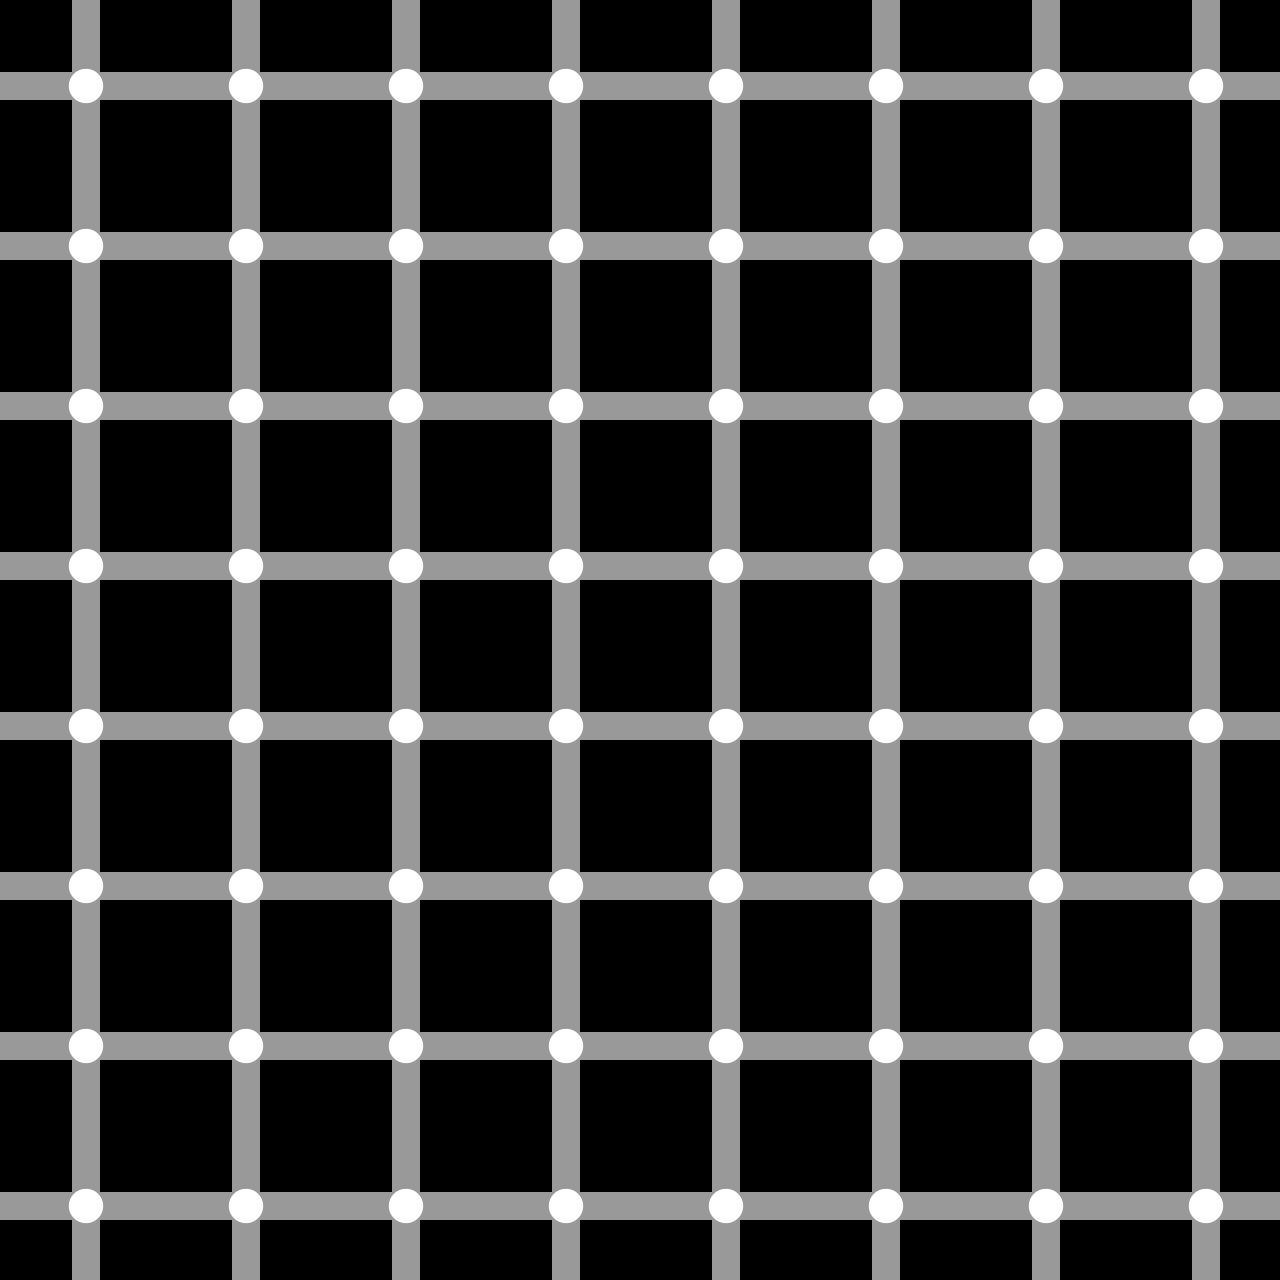 A grid of grey lines and white dots on a black background.  Most people also see flashing black dots, which don't actually exist in the image.